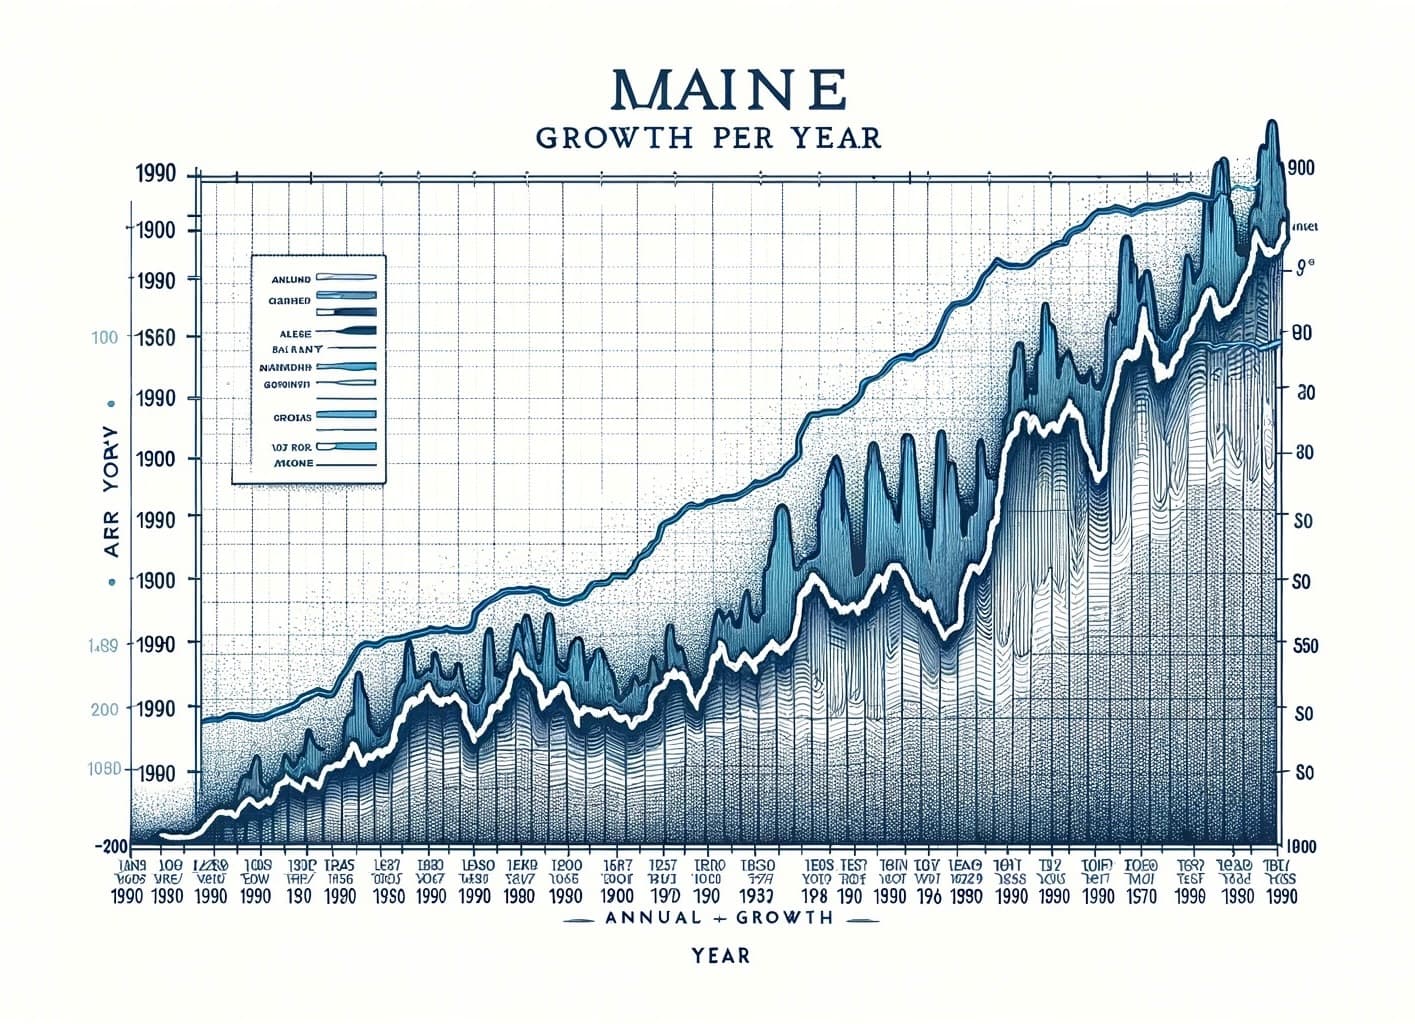 The inscription Maine next to the graph